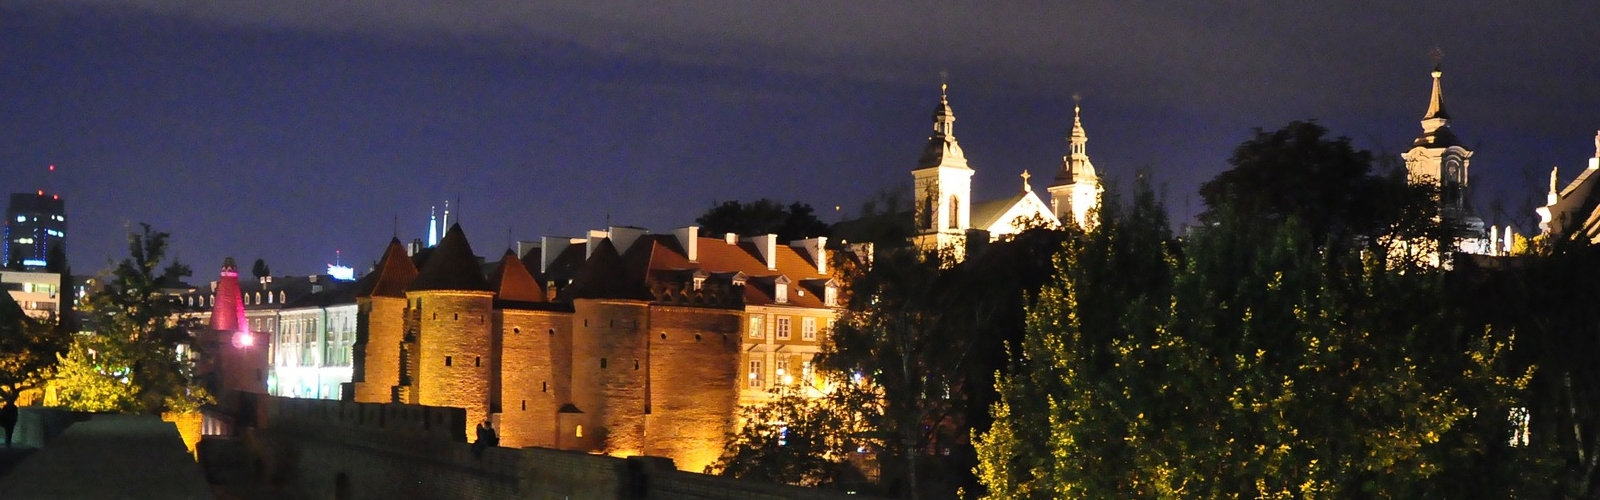 Old town by night